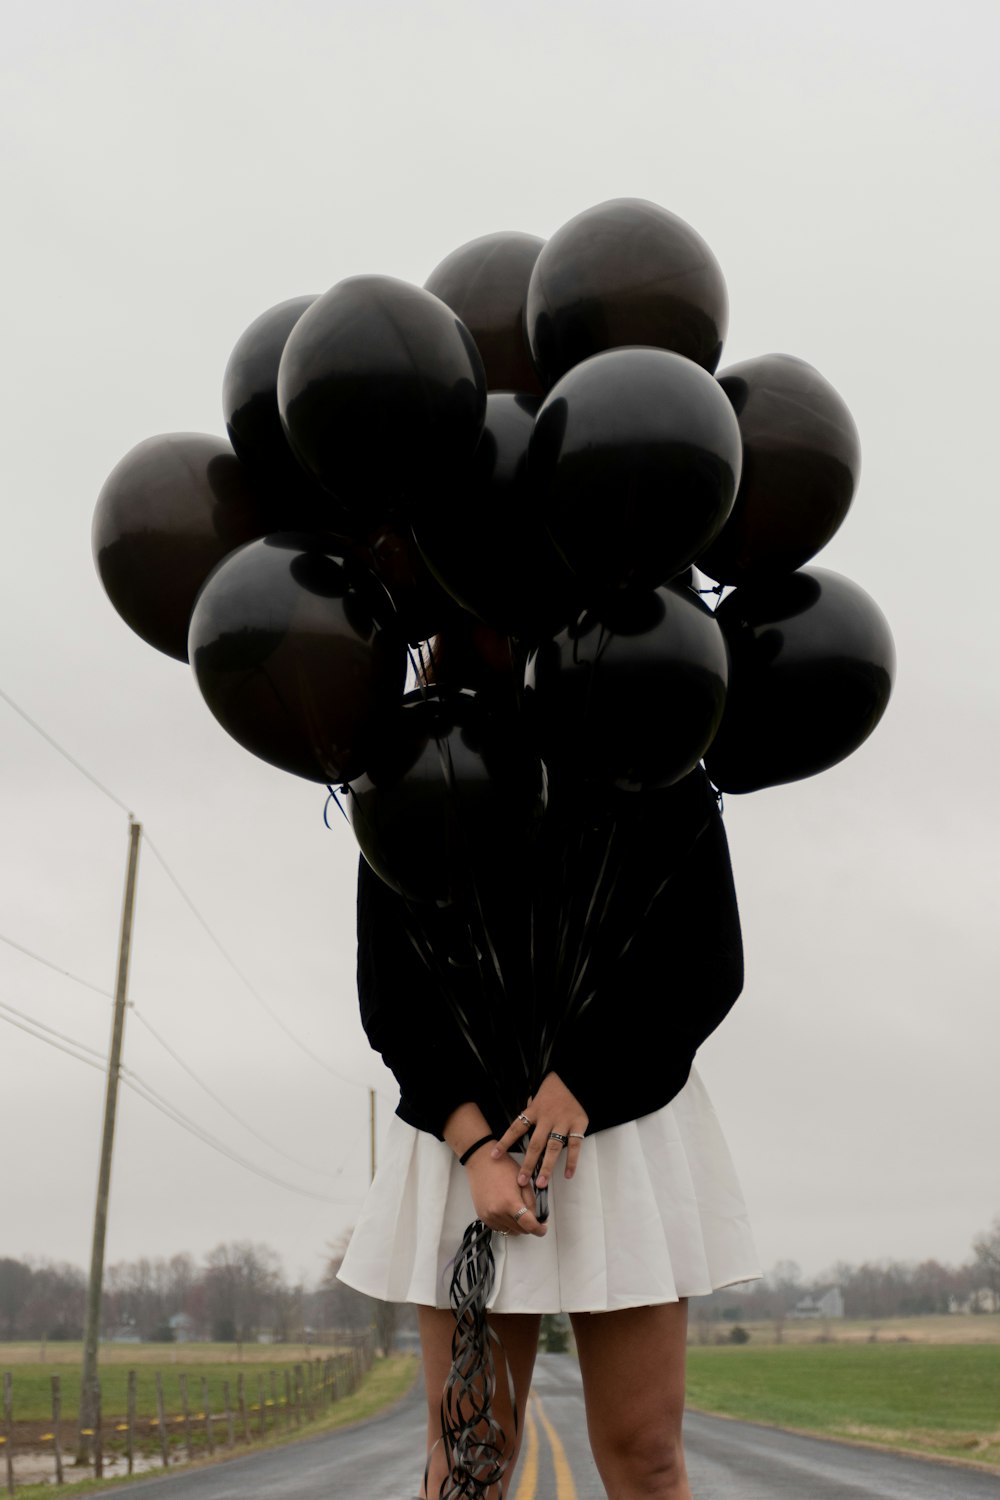 black balloons on mid air during daytime